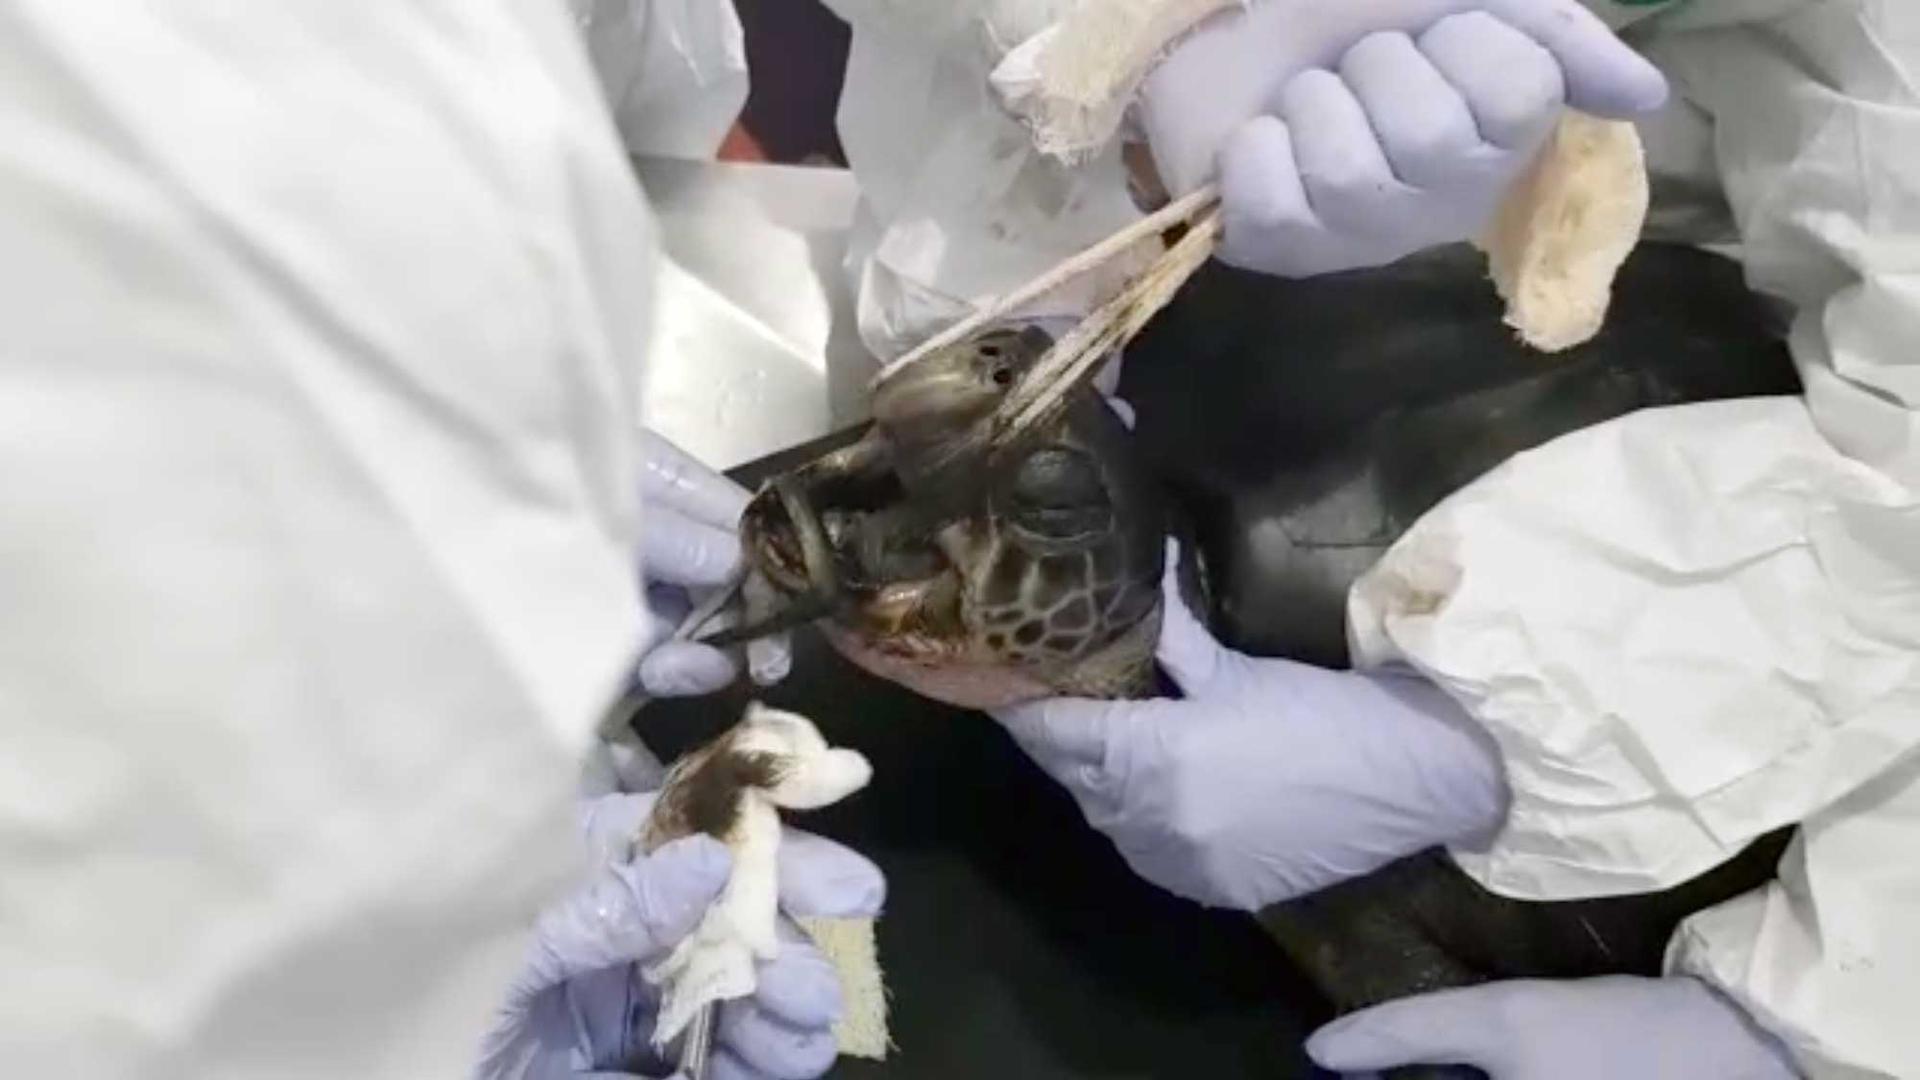 A sea turtles mouth is held open by a piece of cloth as workers wipe oil out of it